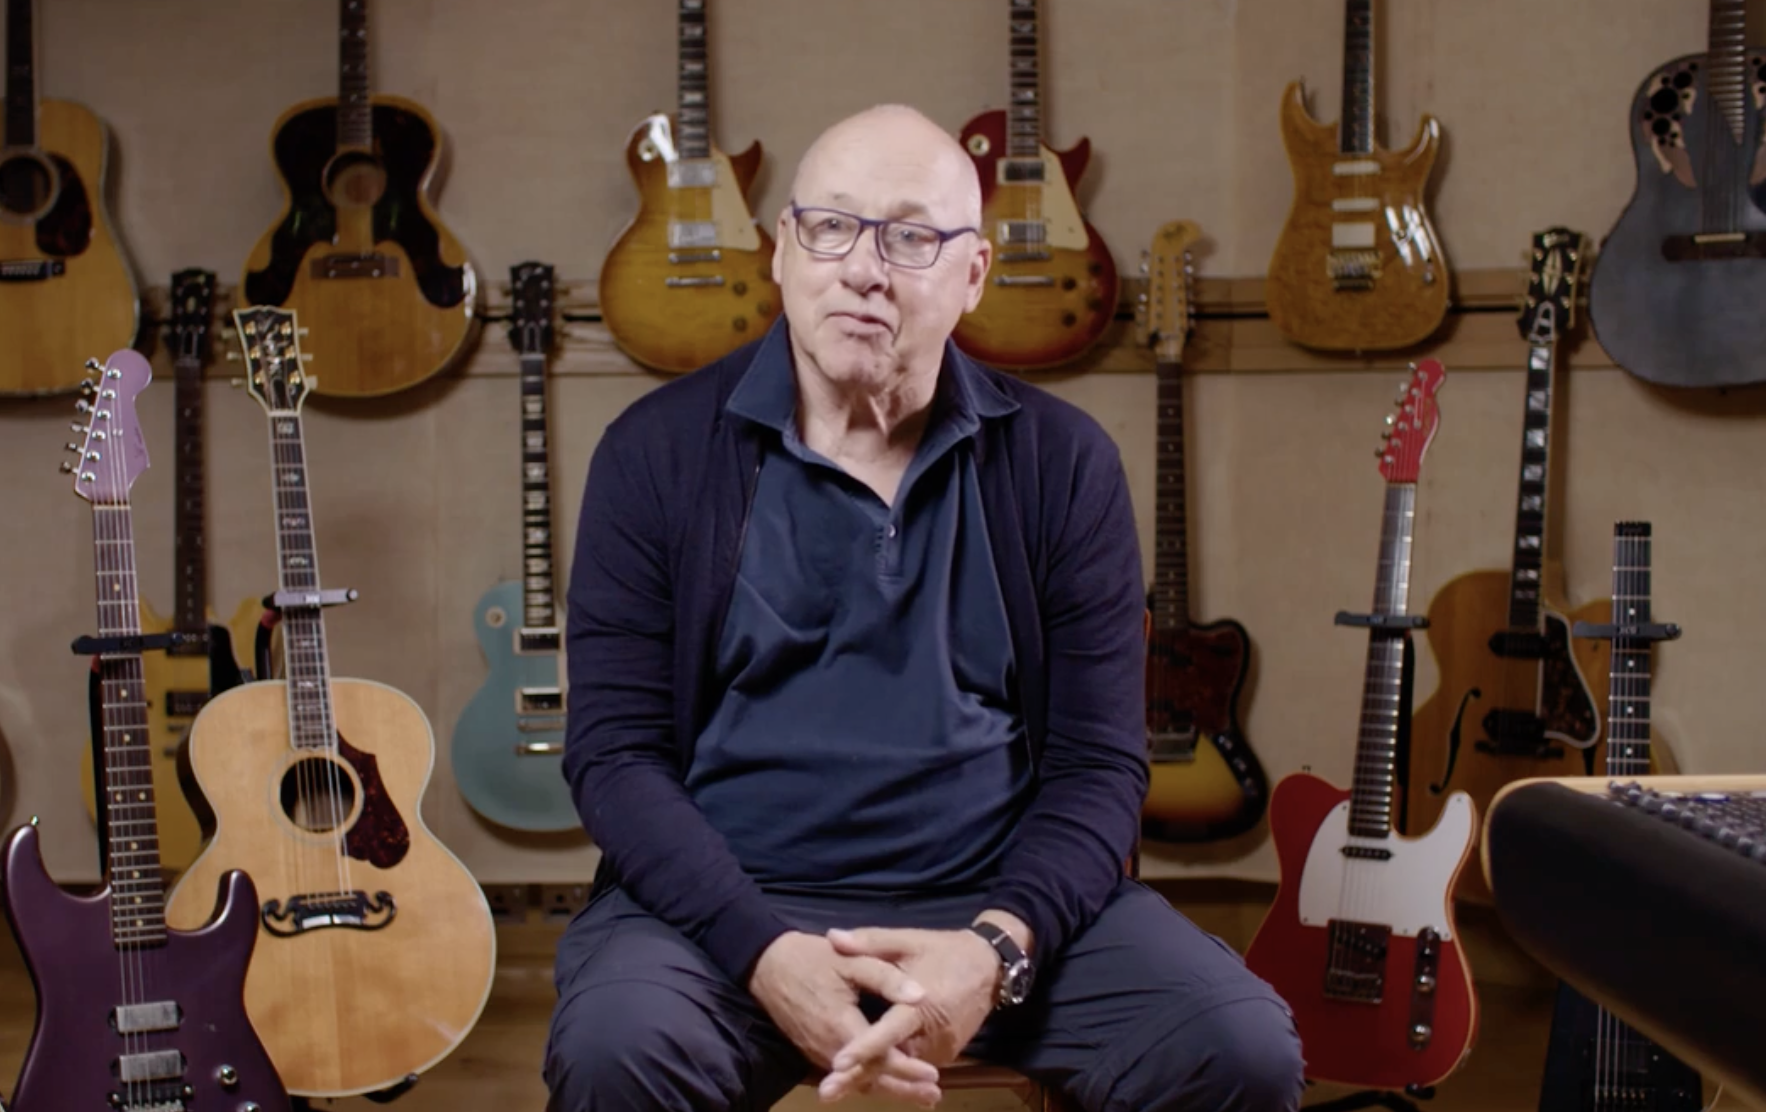 The Mark Knopfler Guitar Collection